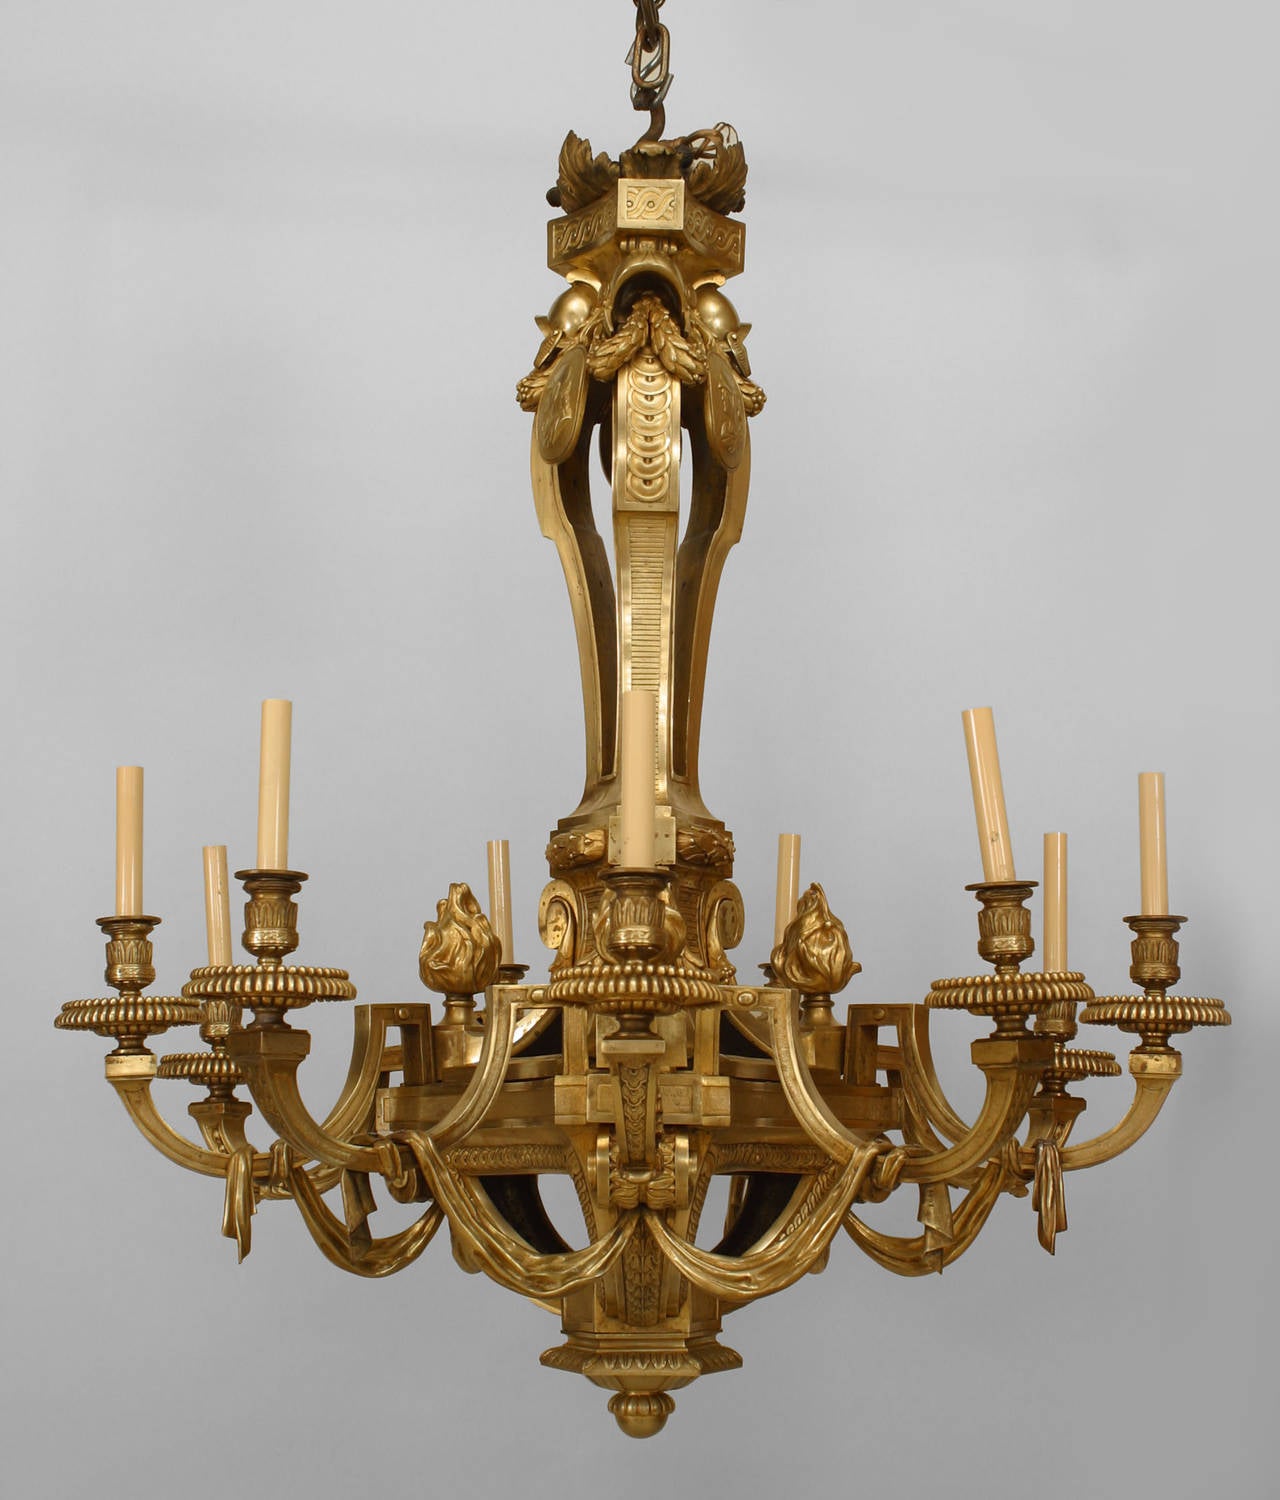 19th century French Louis XVI style bronze doré twelve-arm chandelier with arms joined by a swag design beneath a flame top.